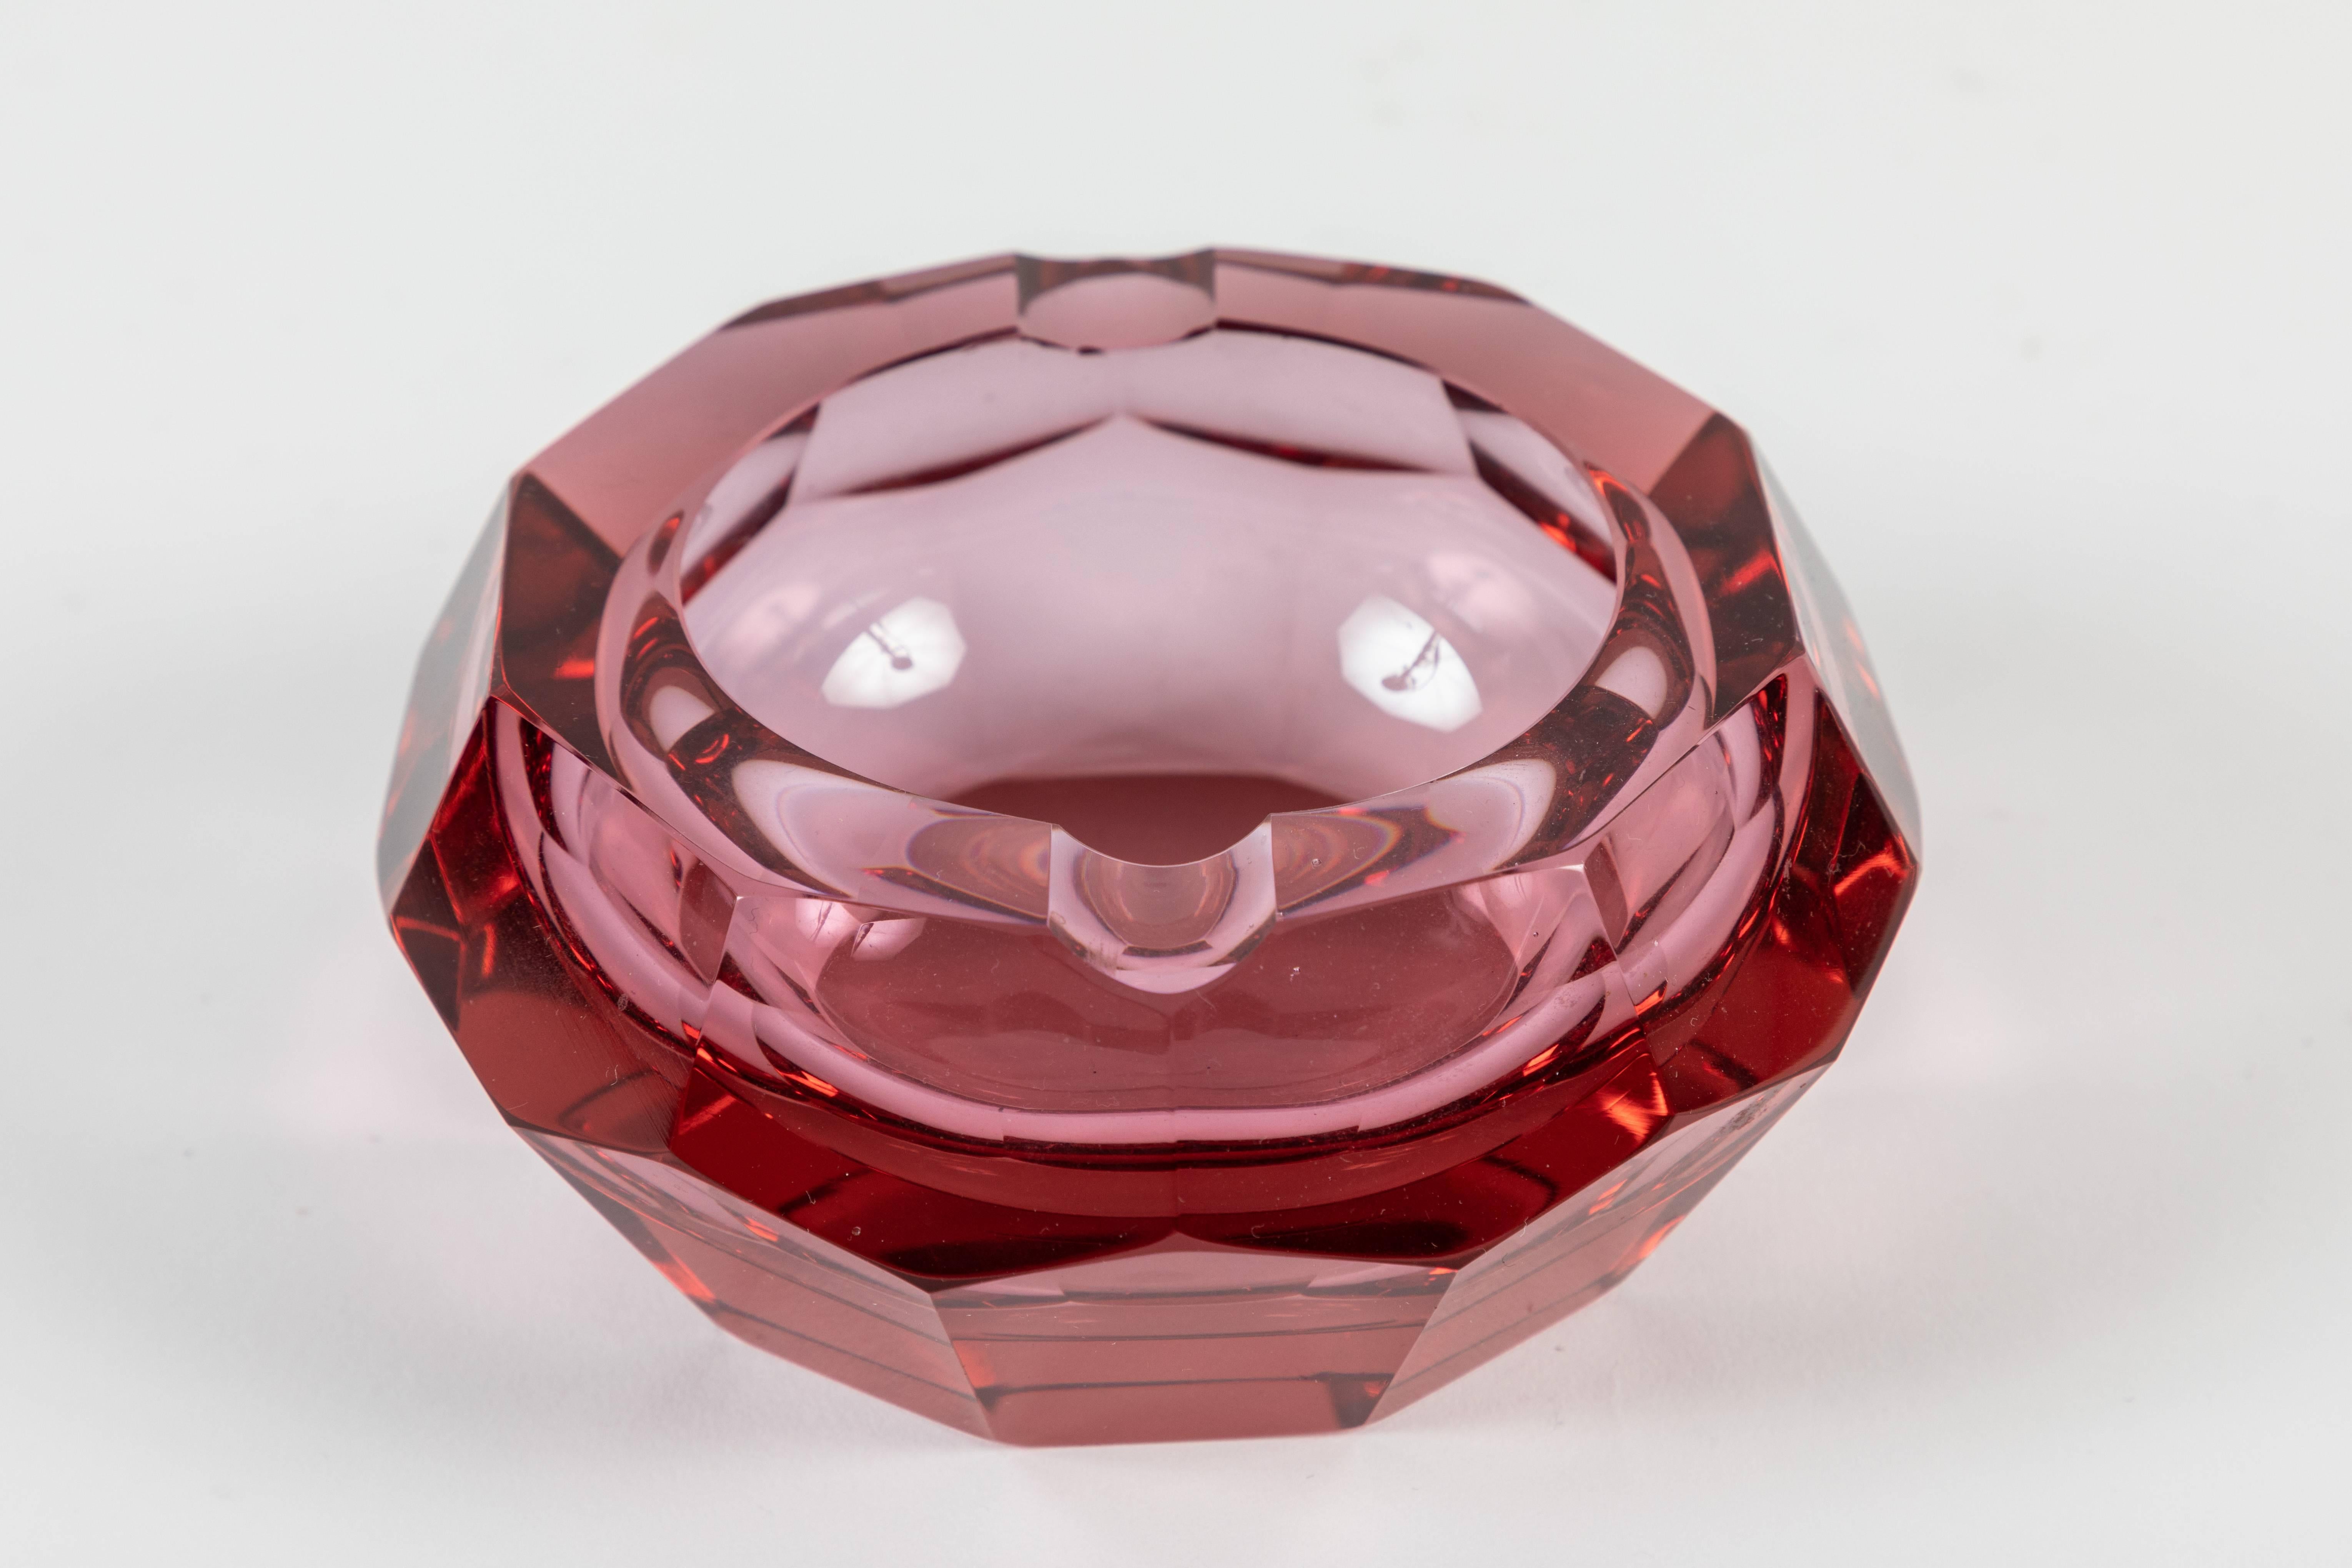 An impressive set of tortoise-cut crystal ashtrays and lighter. Included in the set are: one large ashtray, one small ashtray and one hexagon-cut lighter.

Color: Raspberry pink
Small ashtray: 5